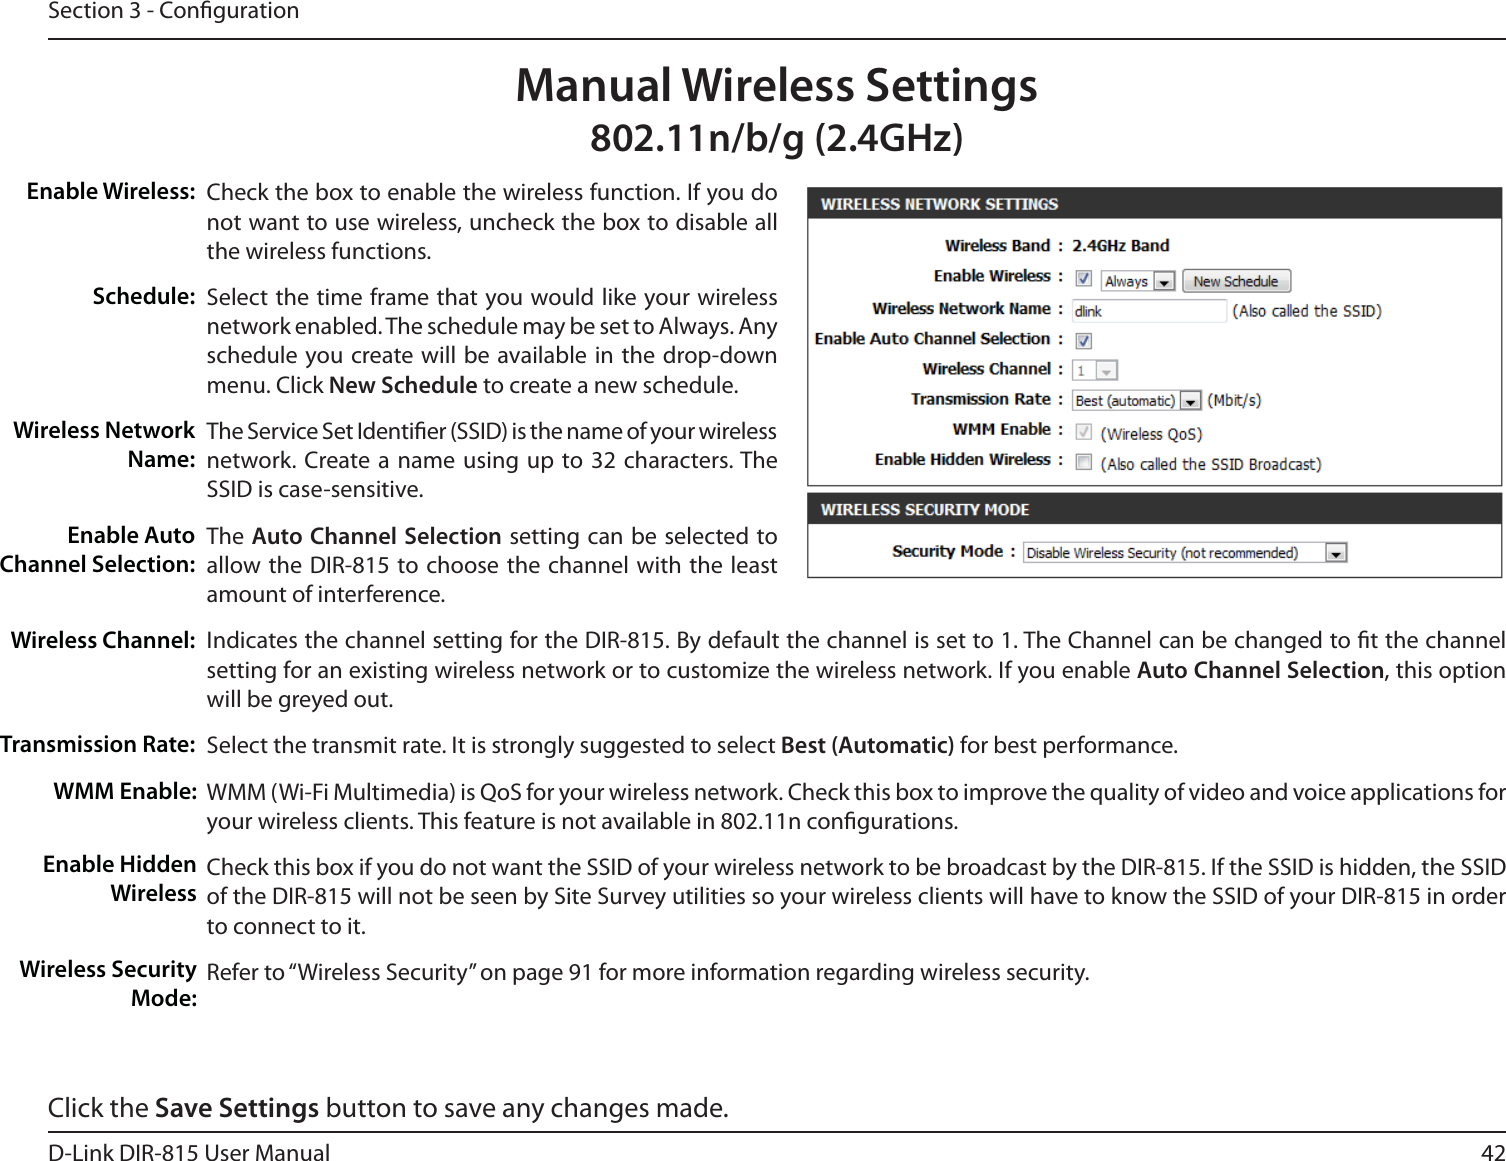 42D-Link DIR-815 User ManualSection 3 - CongurationCheck the box to enable the wireless function. If you do not want to use wireless, uncheck the box to disable all the wireless functions.Select the time frame that you would like your wireless network enabled. The schedule may be set to Always. Any schedule you create will be available in the drop-down menu. Click New Schedule to create a new schedule.The Service Set Identier (SSID) is the name of your wireless network. Create a name using up to 32 characters. The SSID is case-sensitive.The Auto Channel Selection setting can be selected to allow the DIR-815 to choose the channel with the least amount of interference.Indicates the channel setting for the DIR-815. By default the channel is set to 1. The Channel can be changed to t the channel setting for an existing wireless network or to customize the wireless network. If you enable Auto Channel Selection, this option will be greyed out.Select the transmit rate. It is strongly suggested to select Best (Automatic) for best performance.WMM (Wi-Fi Multimedia) is QoS for your wireless network. Check this box to improve the quality of video and voice applications foryour wireless clients. This feature is not available in 802.11n congurations.Check this box if you do not want the SSID of your wireless network to be broadcast by the DIR-815. If the SSID is hidden, the SSID of the DIR-815 will not be seen by Site Survey utilities so your wireless clients will have to know the SSID of your DIR-815 in order to connect to it.Refer to “Wireless Security” on page 91 for more information regarding wireless security.Enable Wireless:Schedule:Wireless Network Name:Enable Auto Channel Selection:Wireless Channel:Transmission Rate:Manual Wireless SettingsOCH()[WMM Enable:Enable Hidden WirelessWireless Security Mode:Click the Save Settings button to save any changes made.